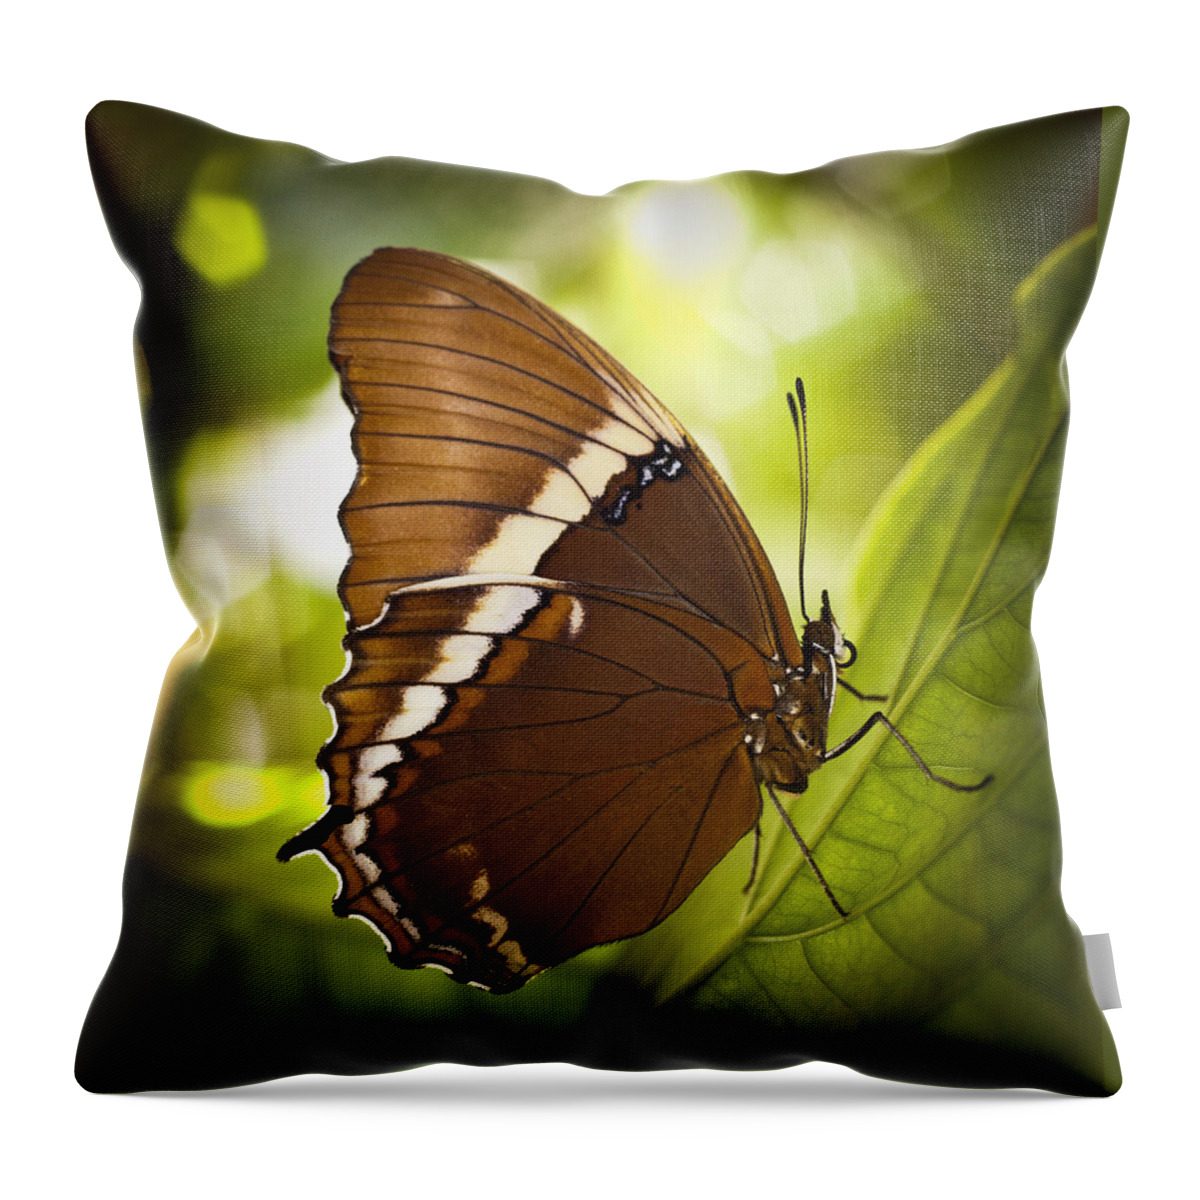 Florida Throw Pillow featuring the photograph Rusty Tip Butterfly by Bradley R Youngberg